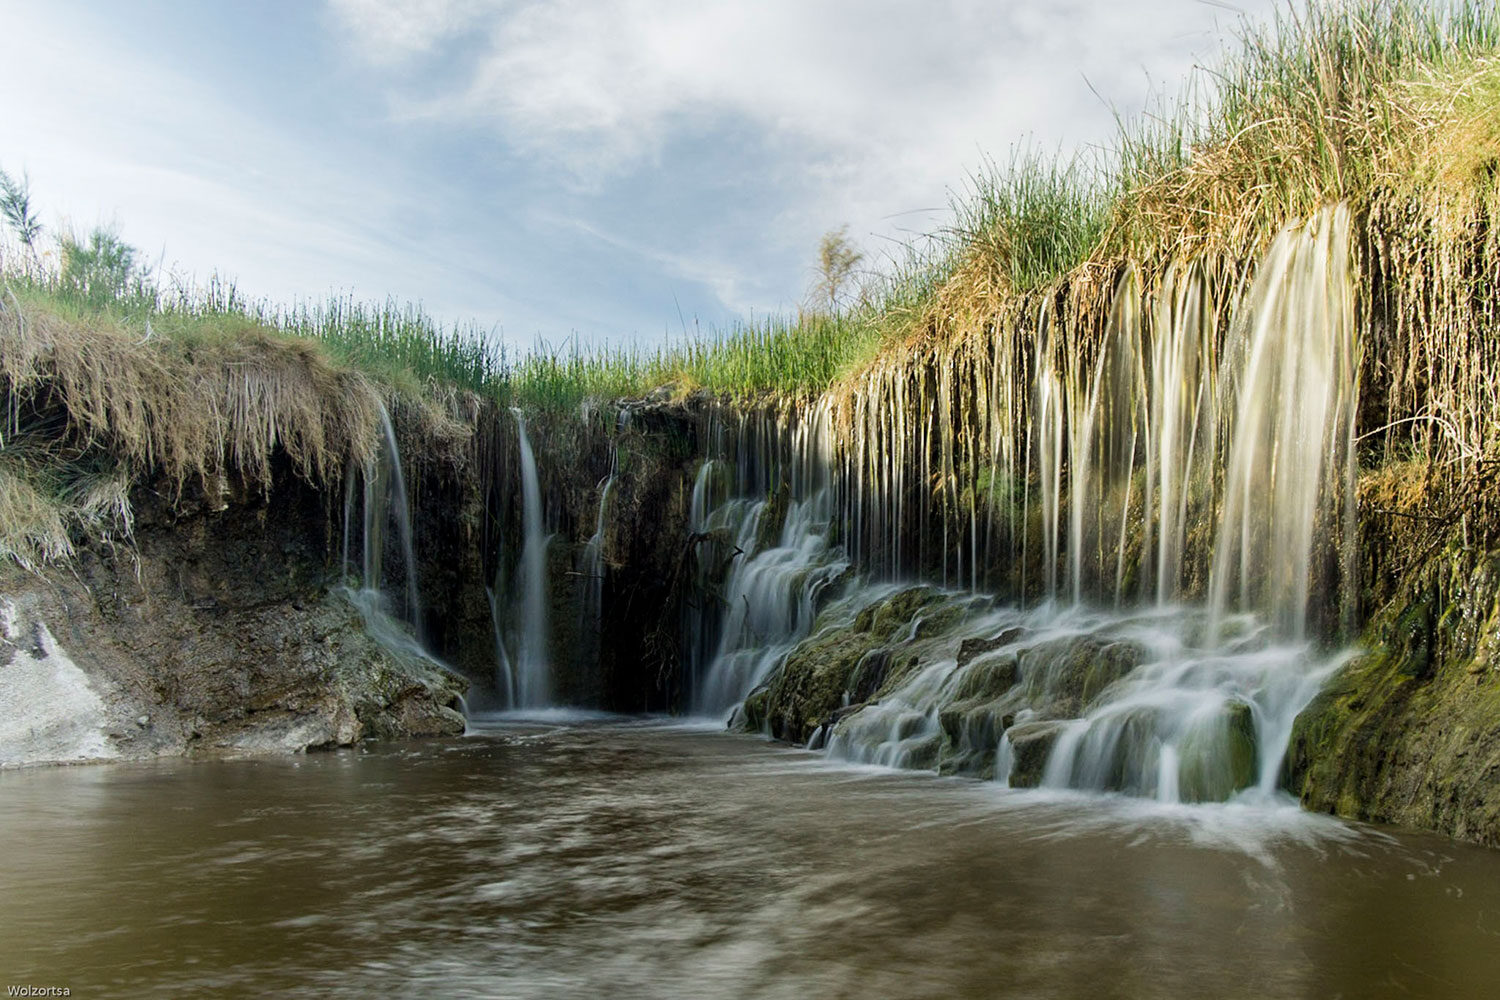 Waterfall flowing over a grassy edge.